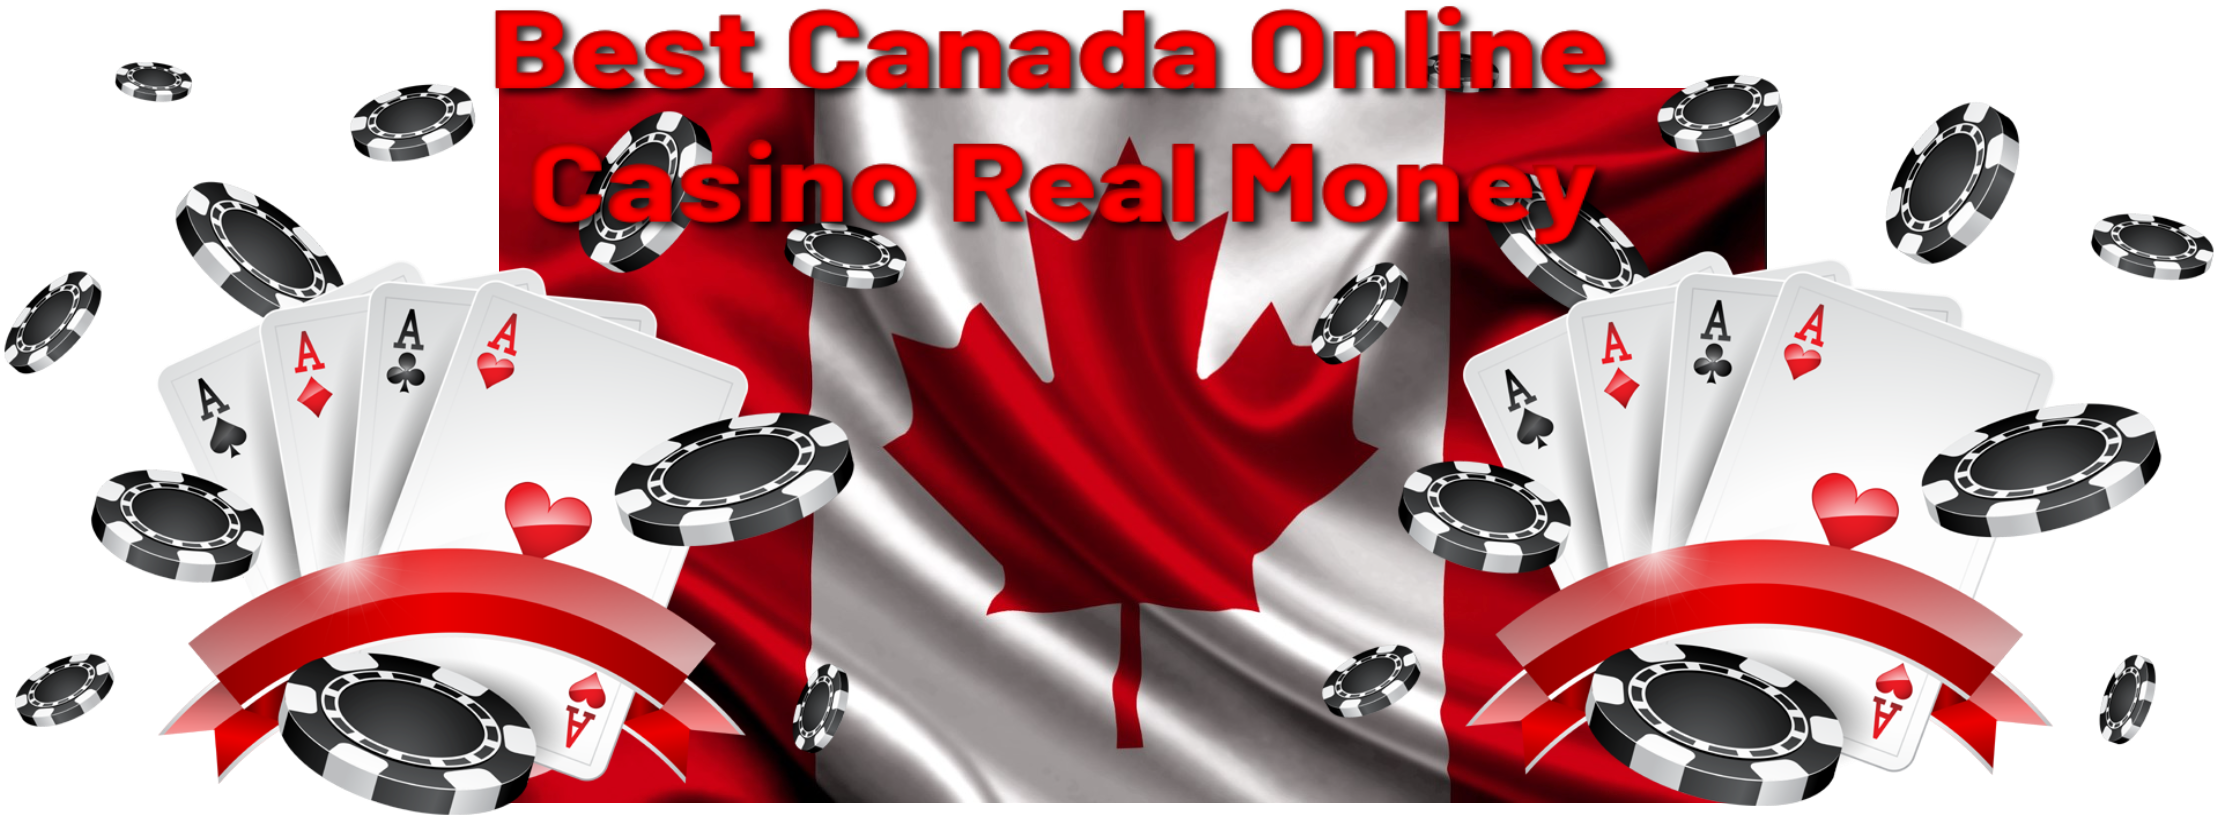 You Can Thank Us Later - 3 Reasons To Stop Thinking About Casino Online